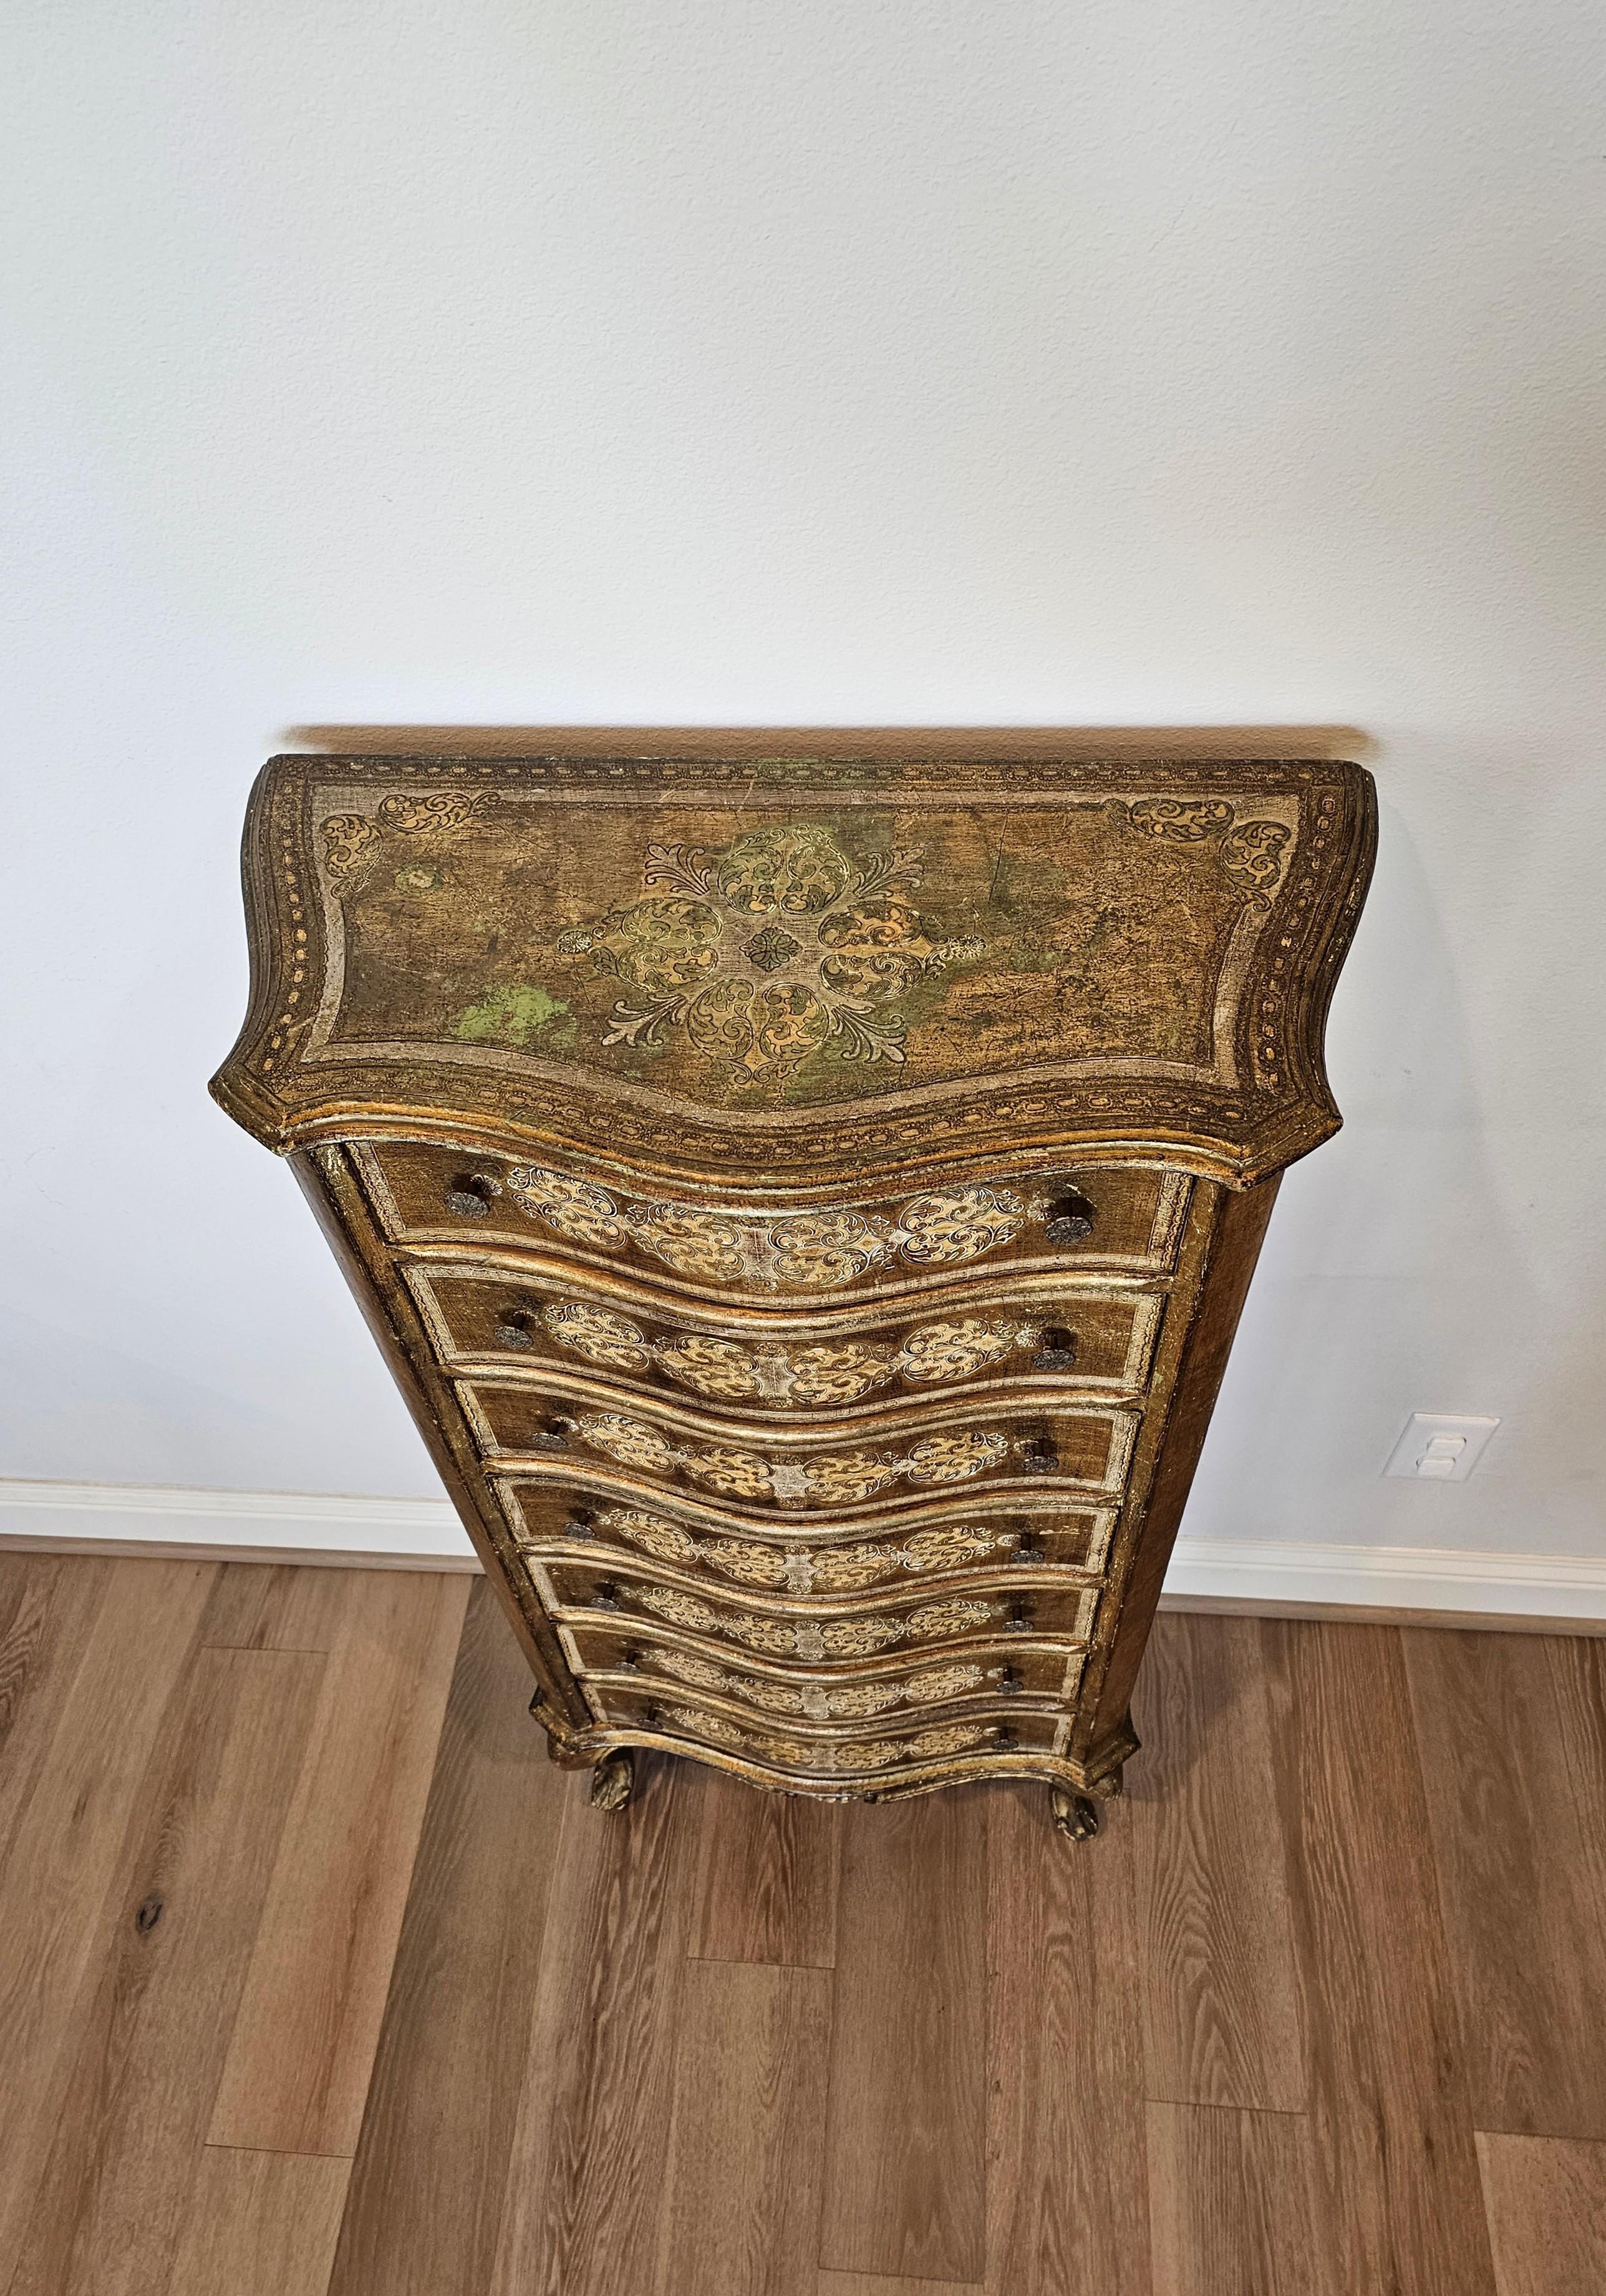 Hand-Carved Vintage Italian Florentine Gilt Tall Chest of Drawers Lingerie Semainier For Sale